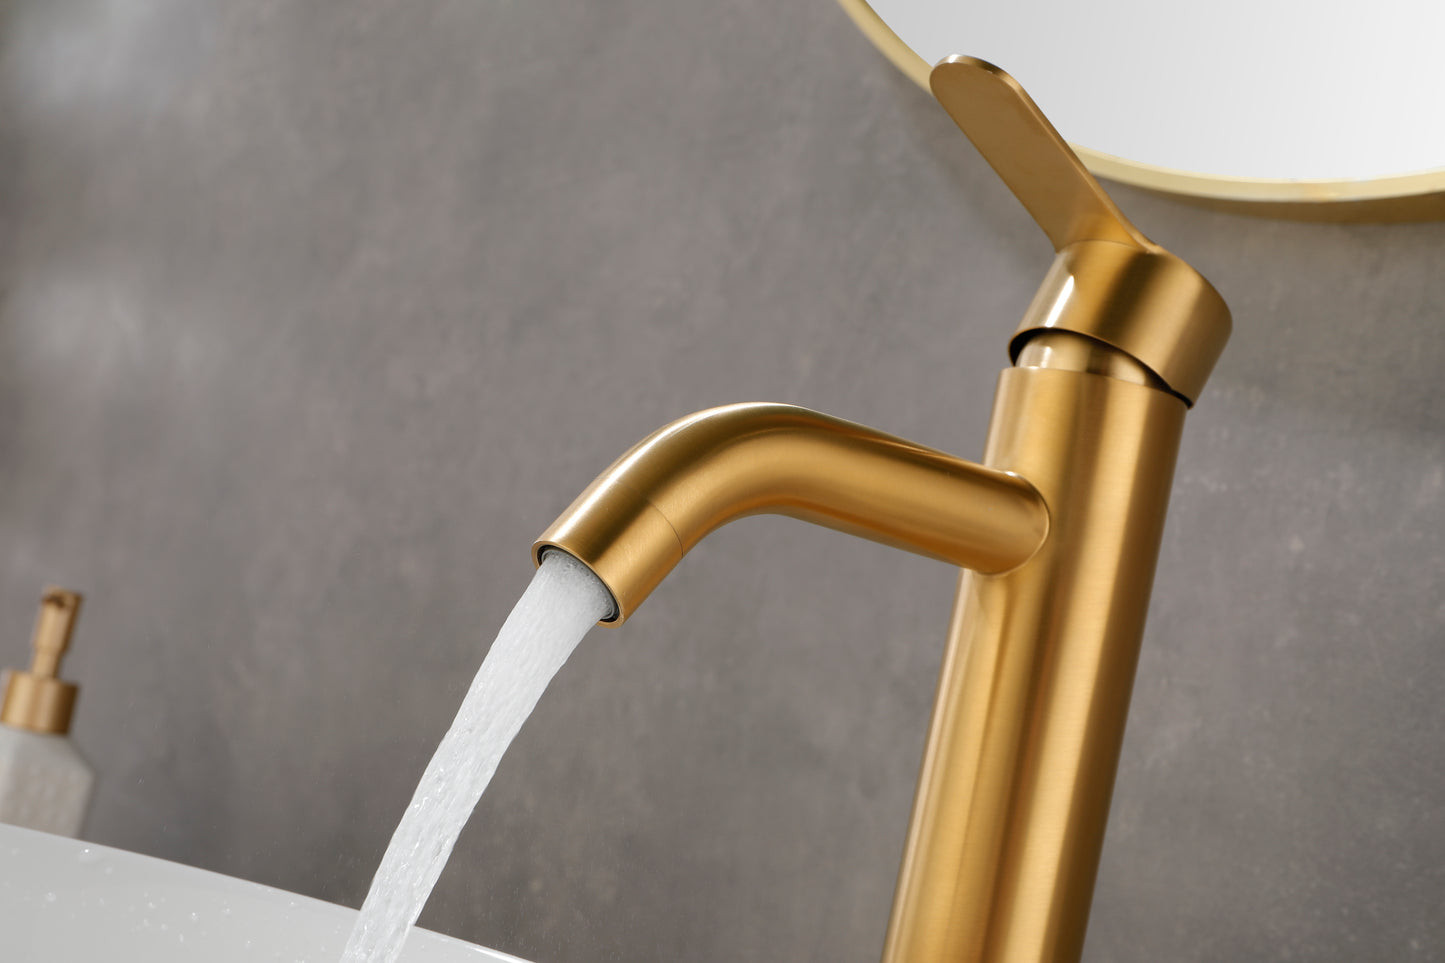 Gold Stainless Steel Waterfall Spout Vanity Sink Faucet with Single Handle